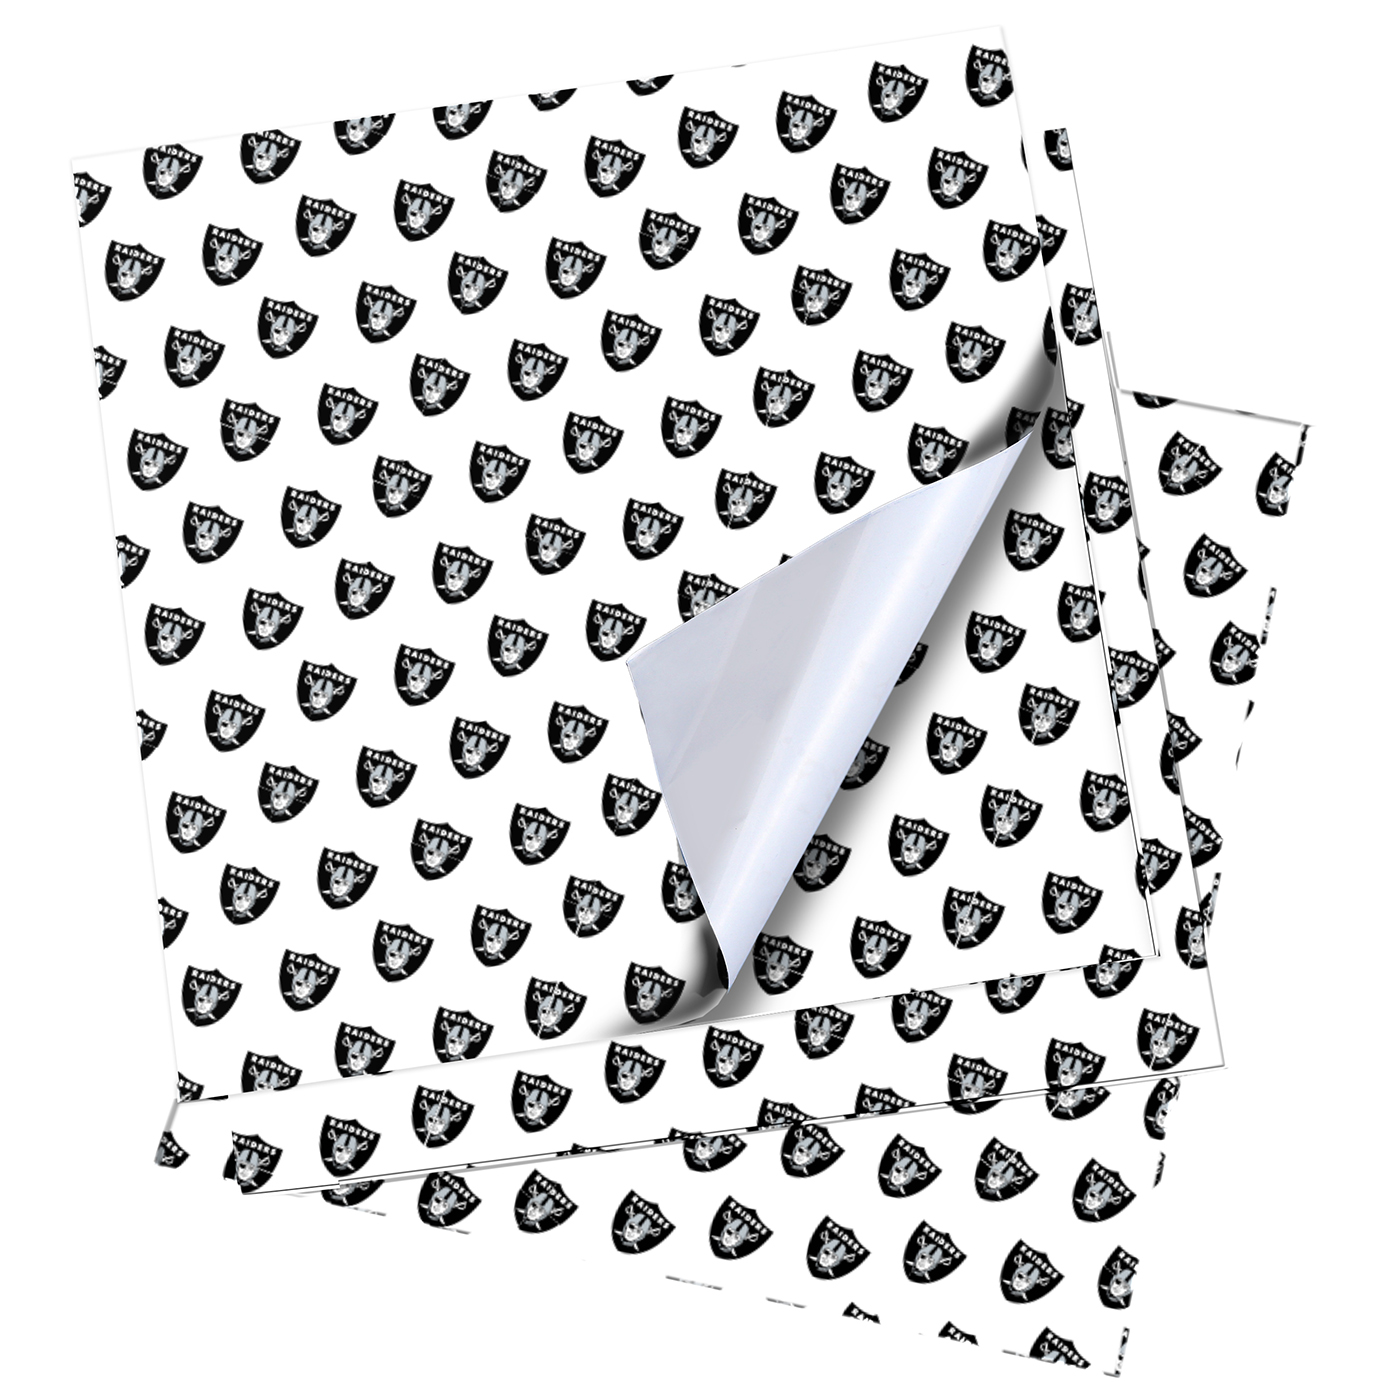 Product Detail  RAIDERS FOLDED WRAPPING PAPER